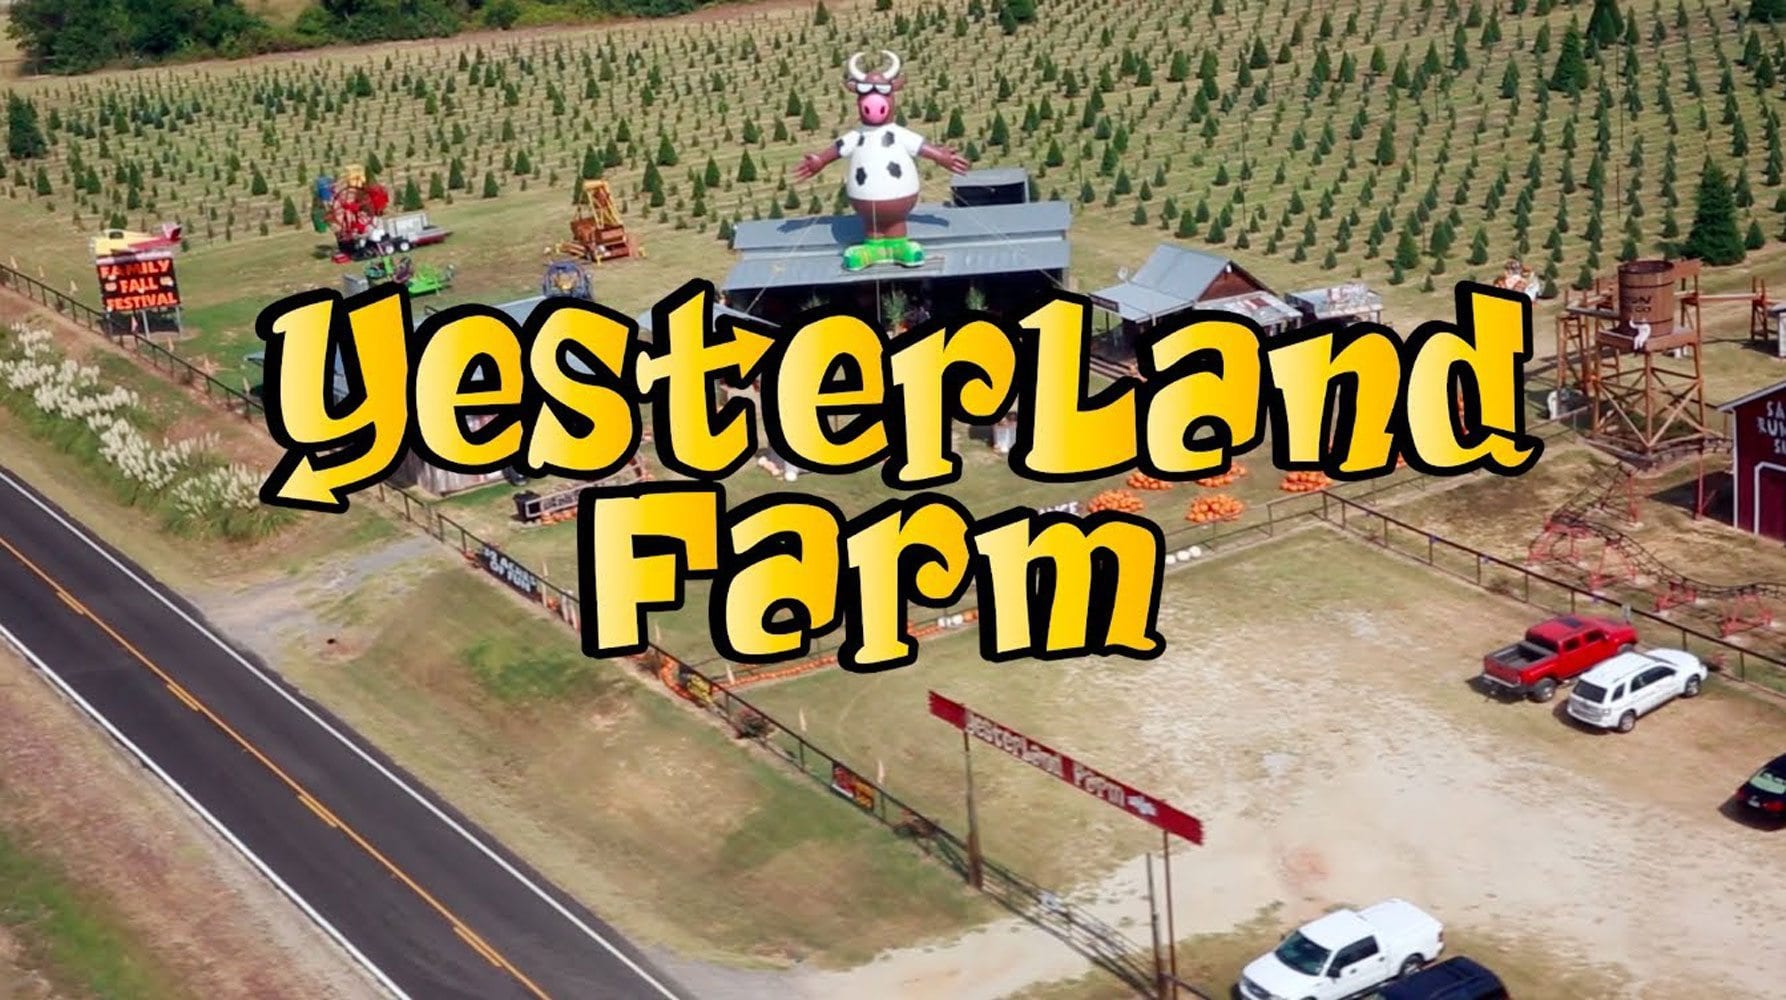 Yesterland Farm logo and aerial pic